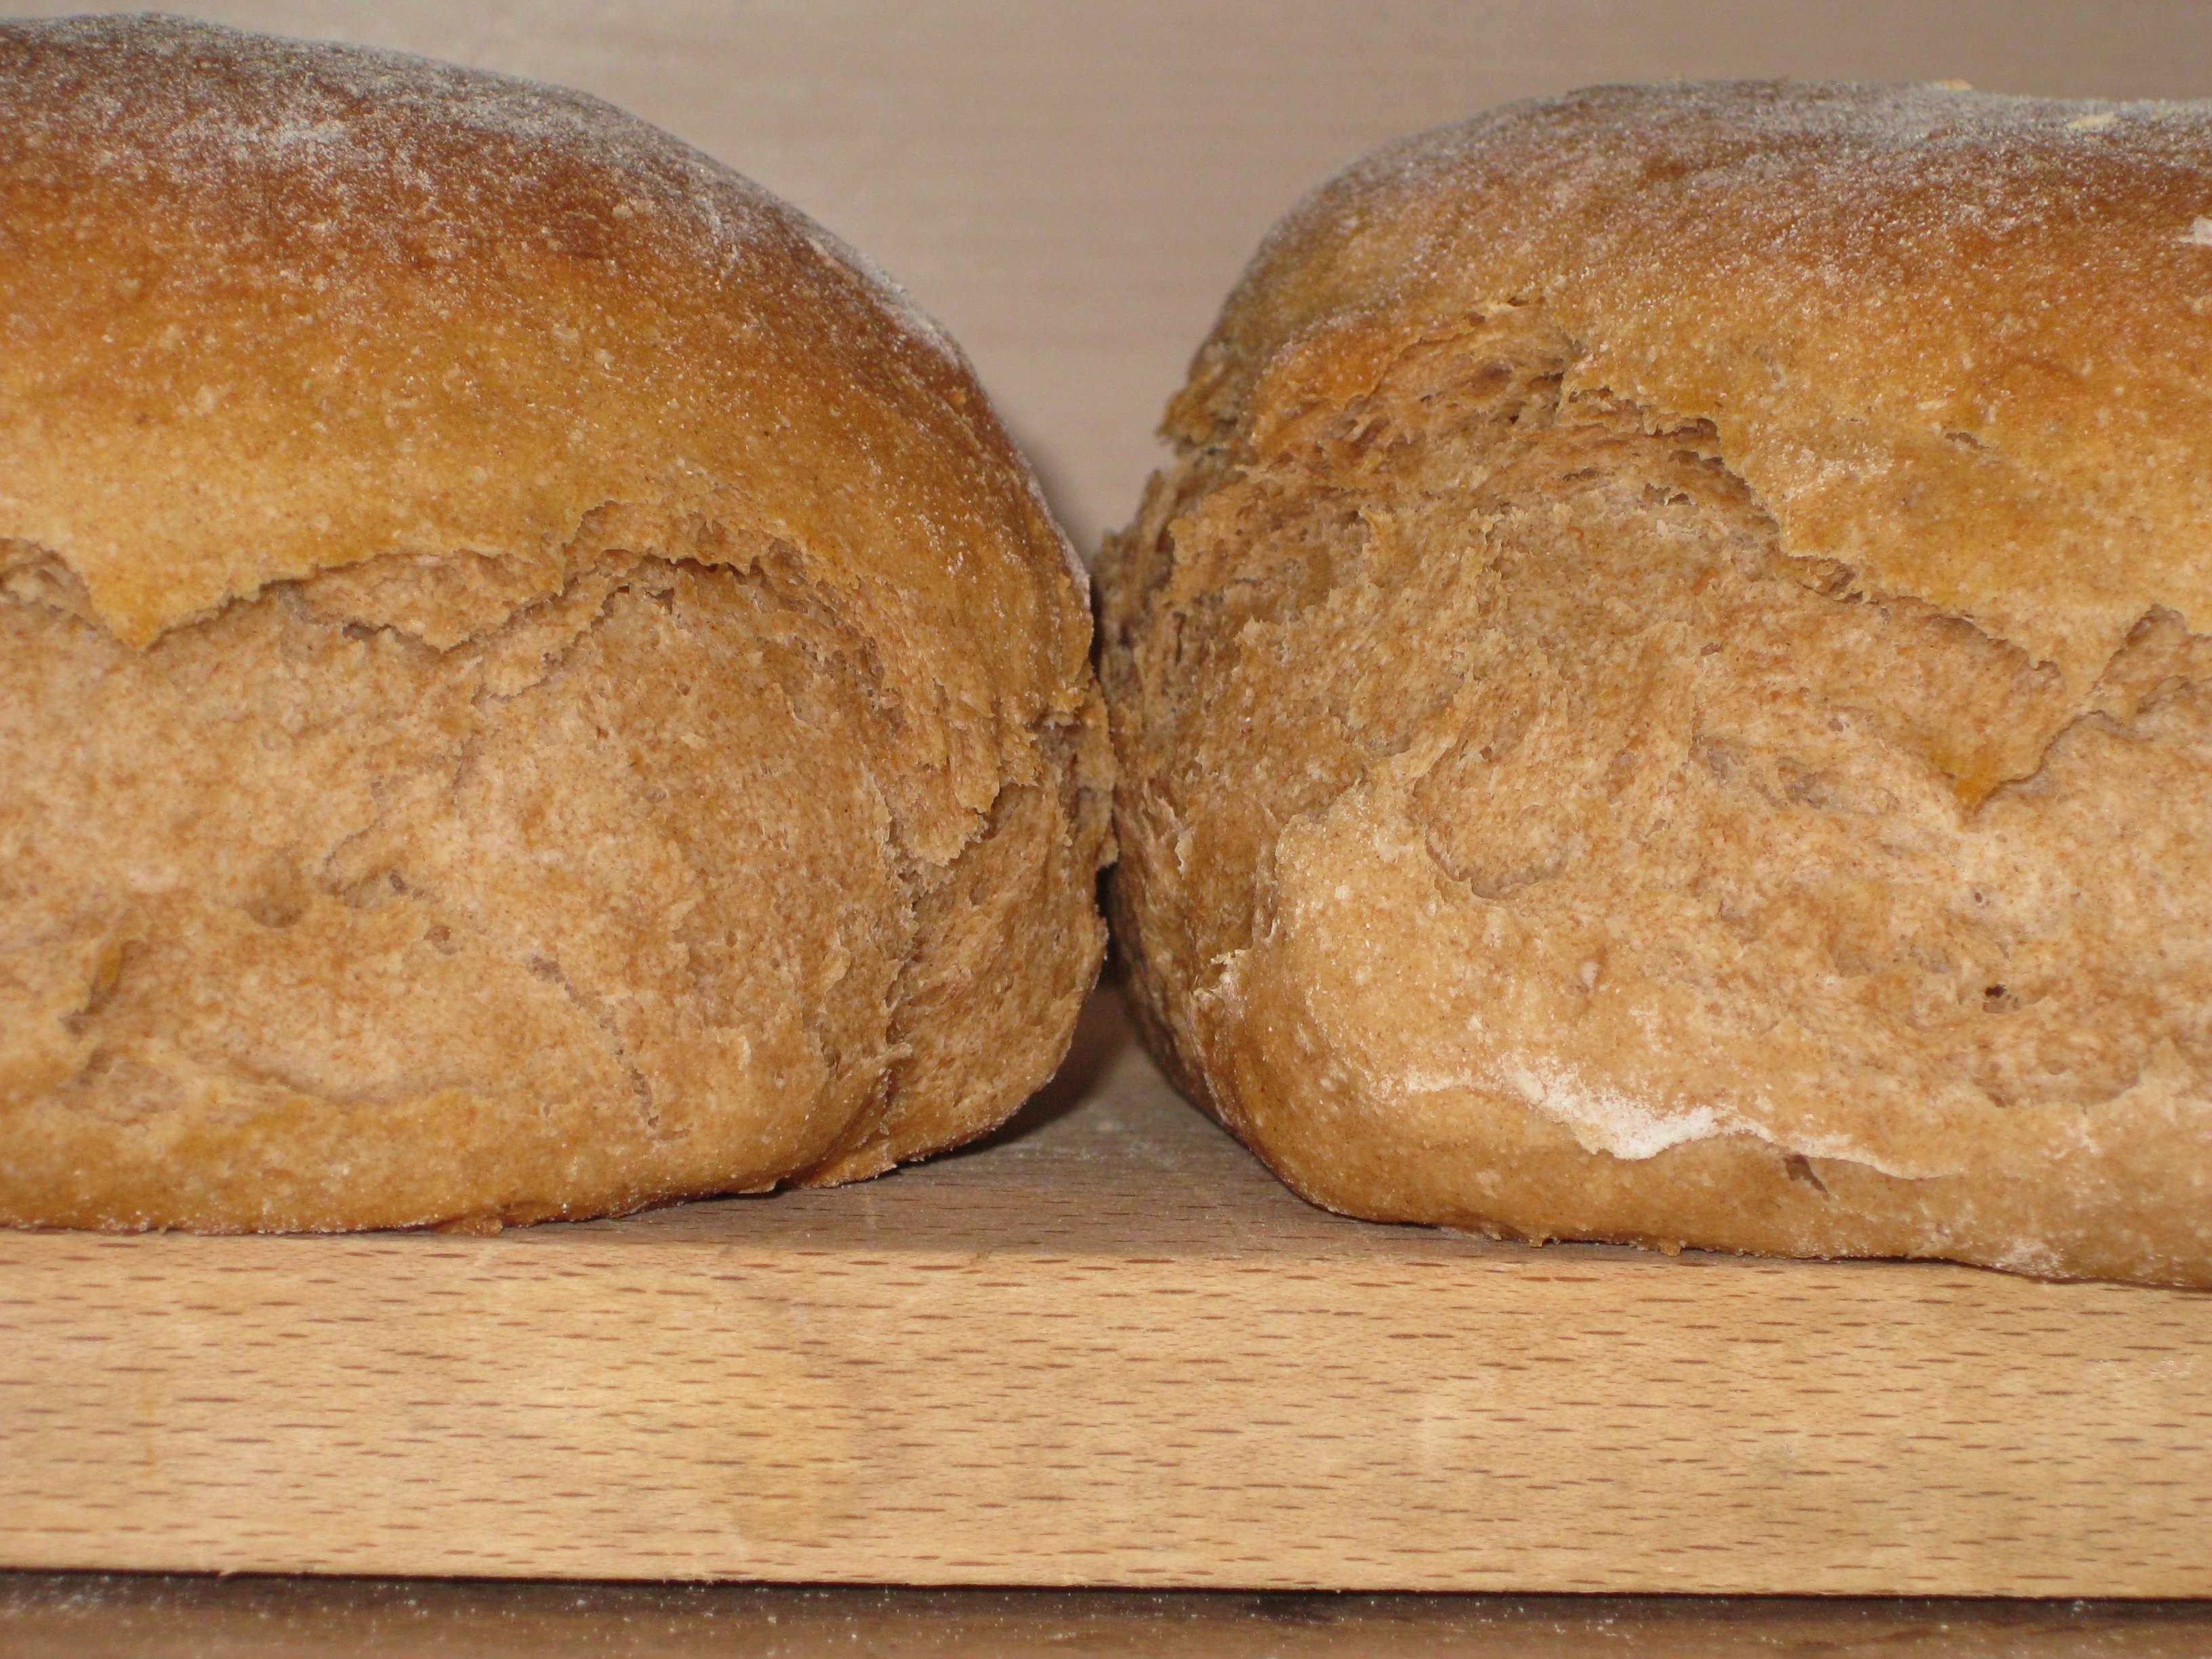 2 baked round breads